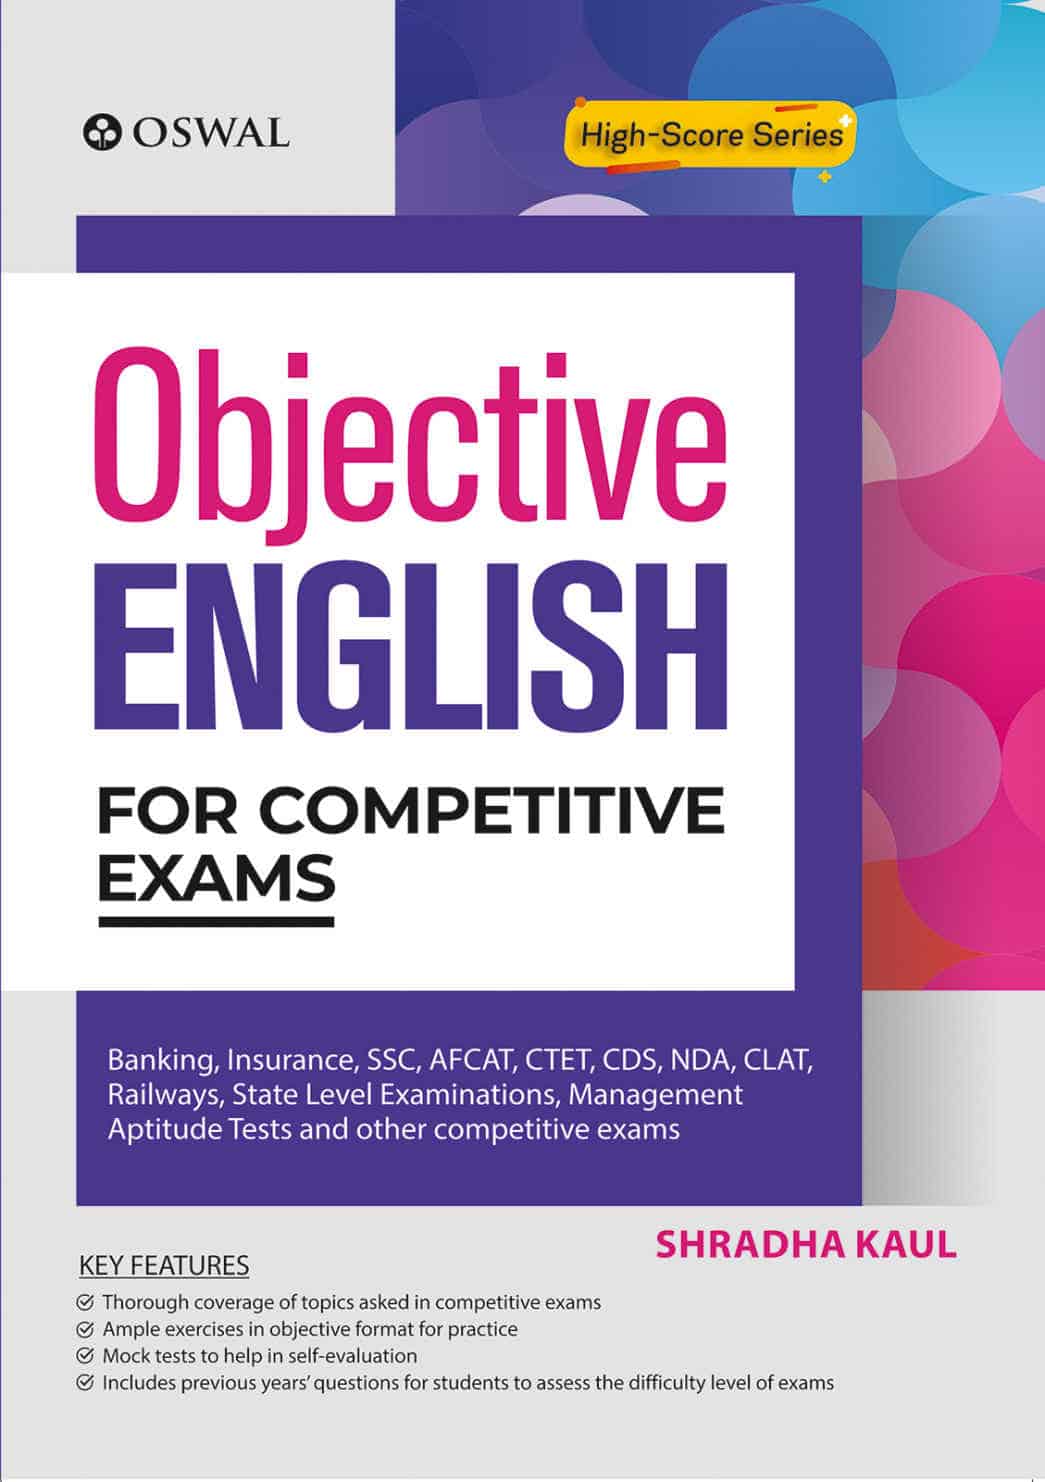 Oswal Objective English For Competitive Exams PDF [2020 Edition]